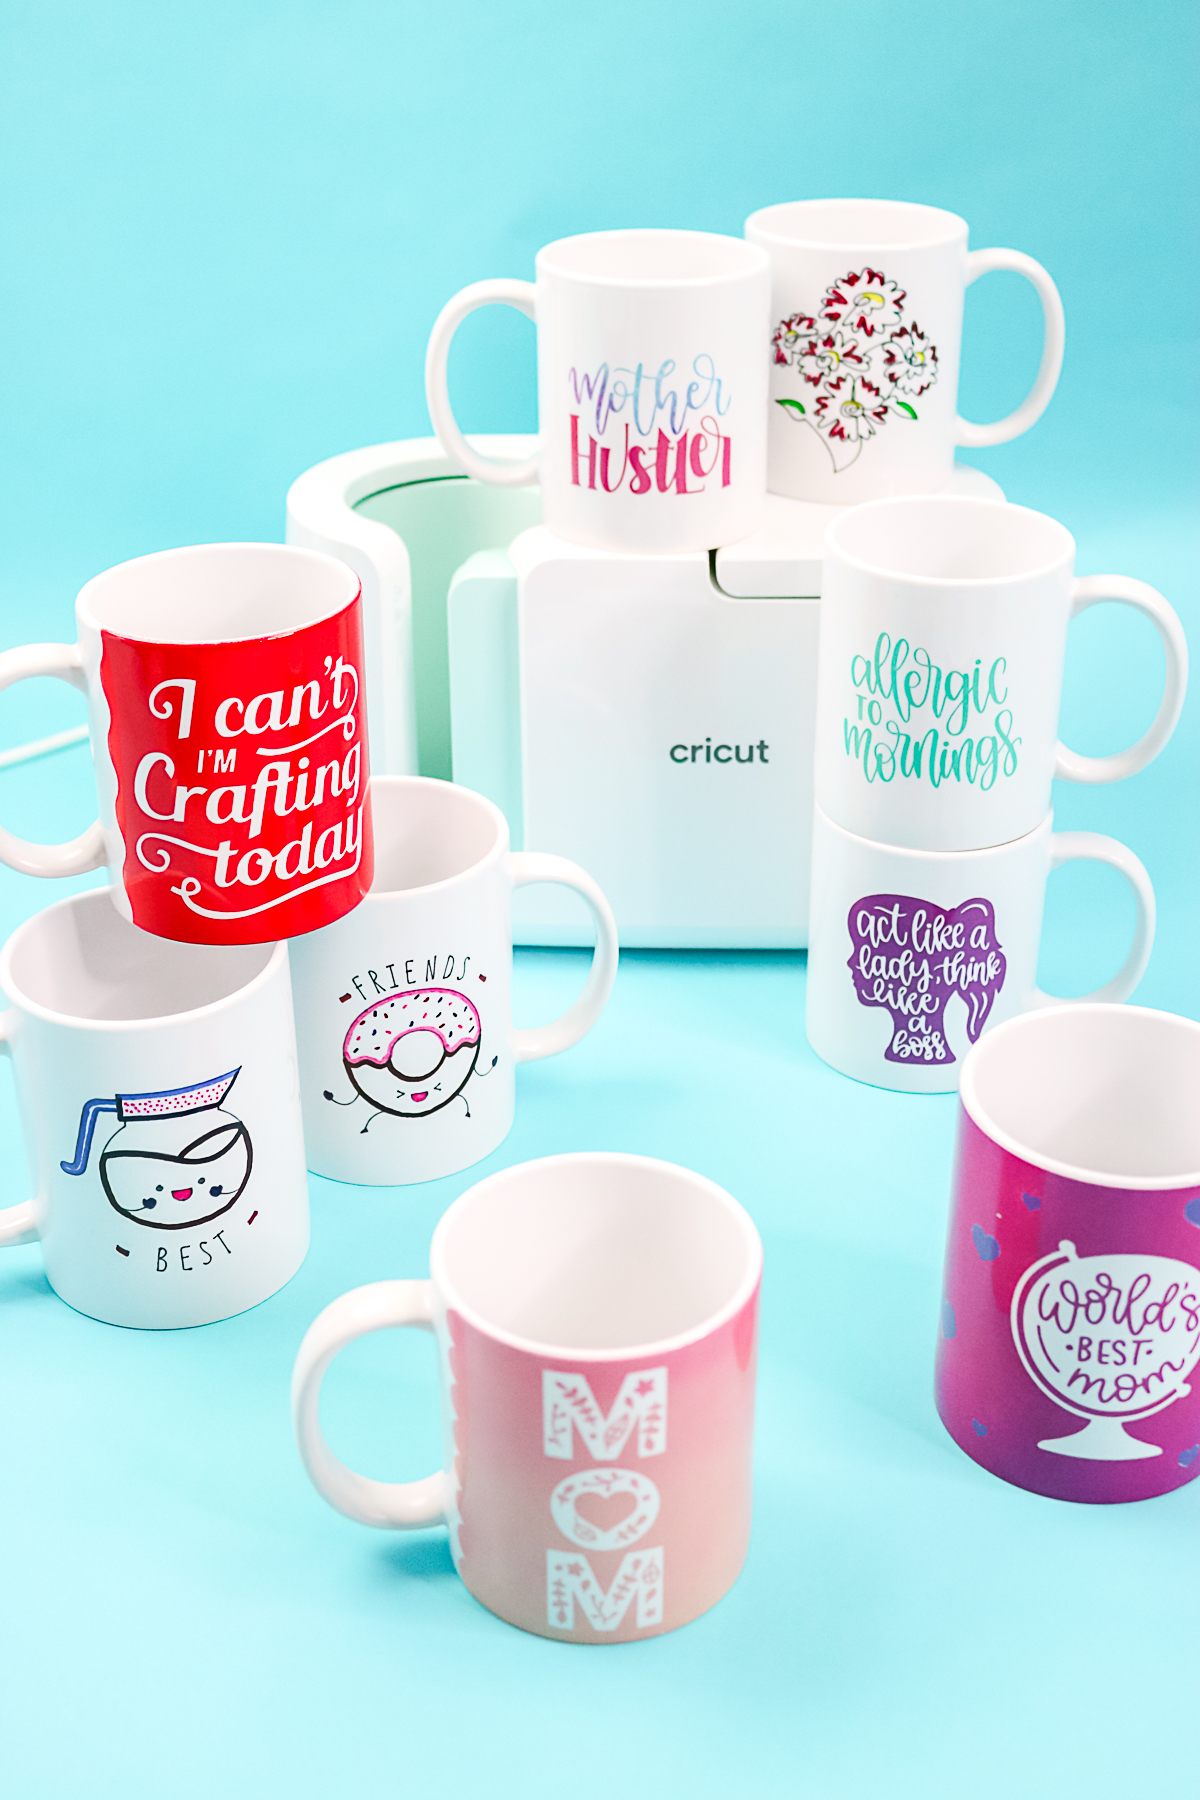 Using infusible ink pens and markers with the Cricut mug press and